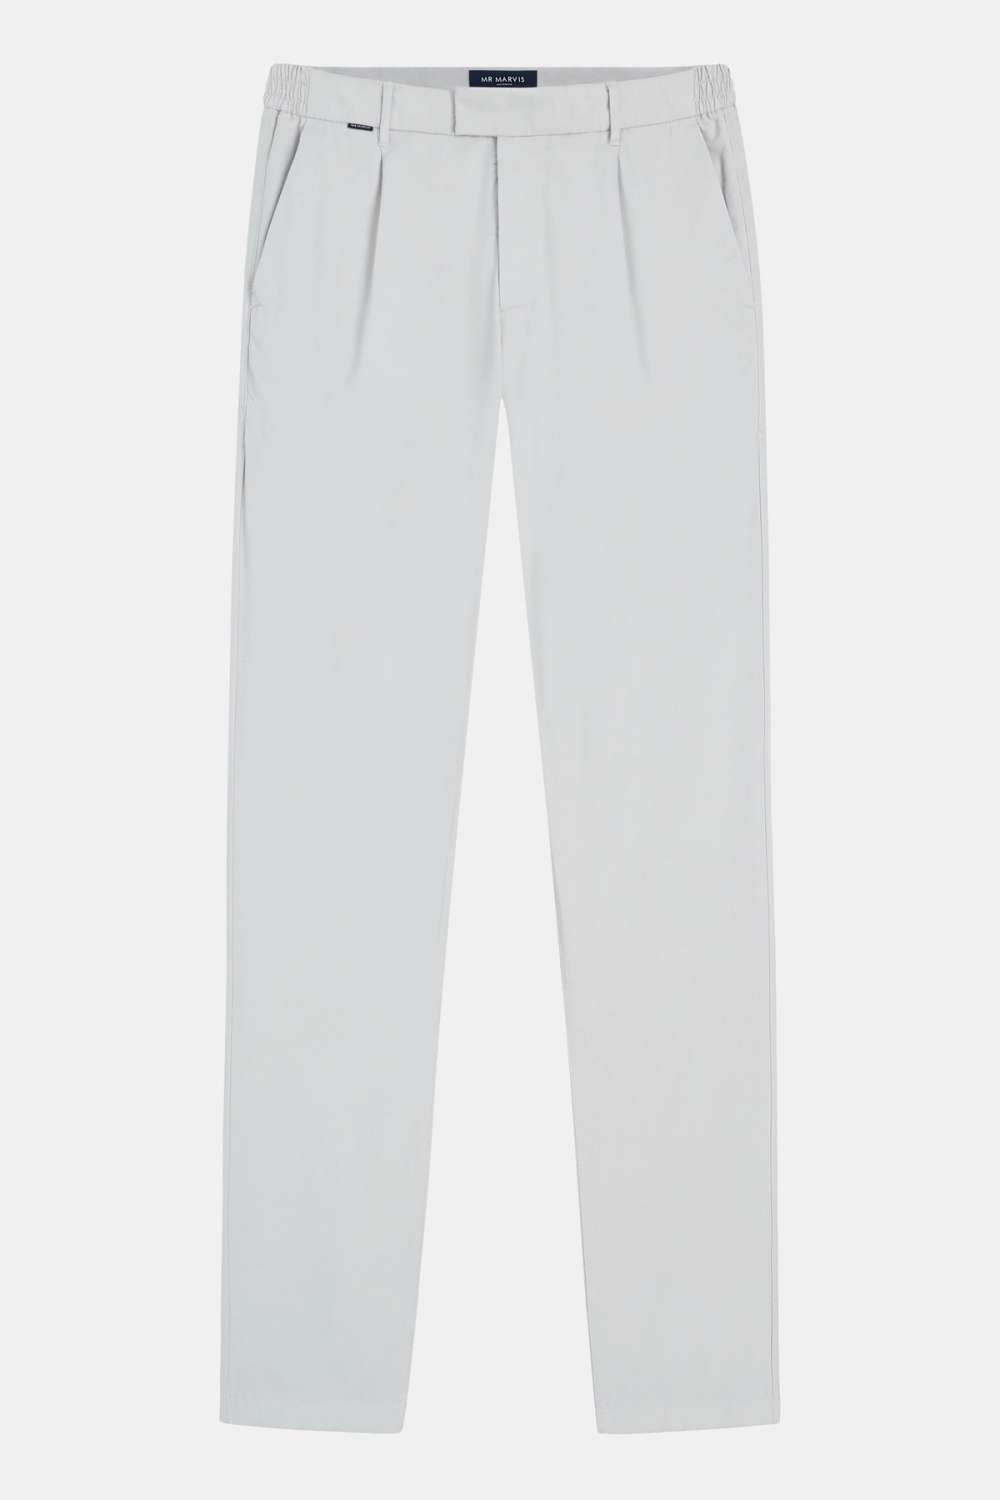 Gullwings - The Classic Chinos